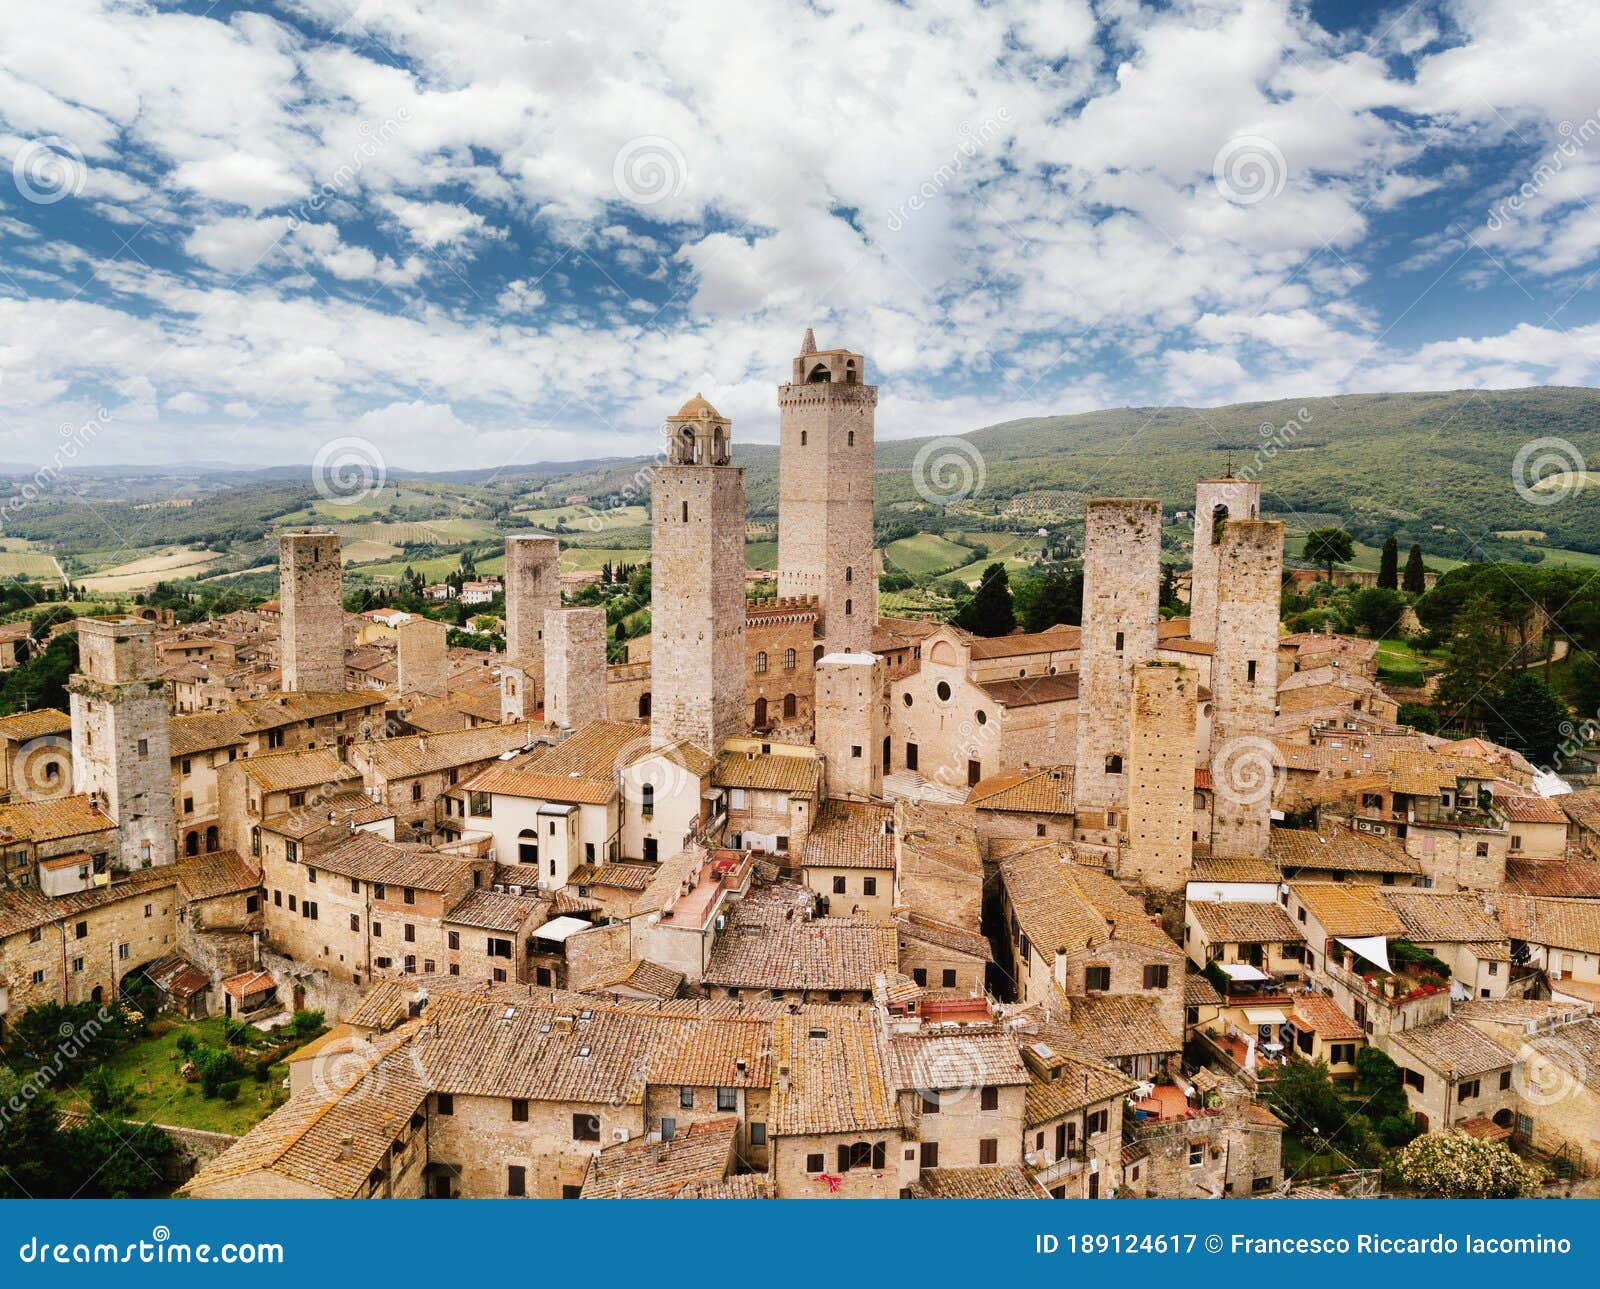 San Gimignano Medieval Town From Above Tuscany Italy Stock Image Image Of Town Historic